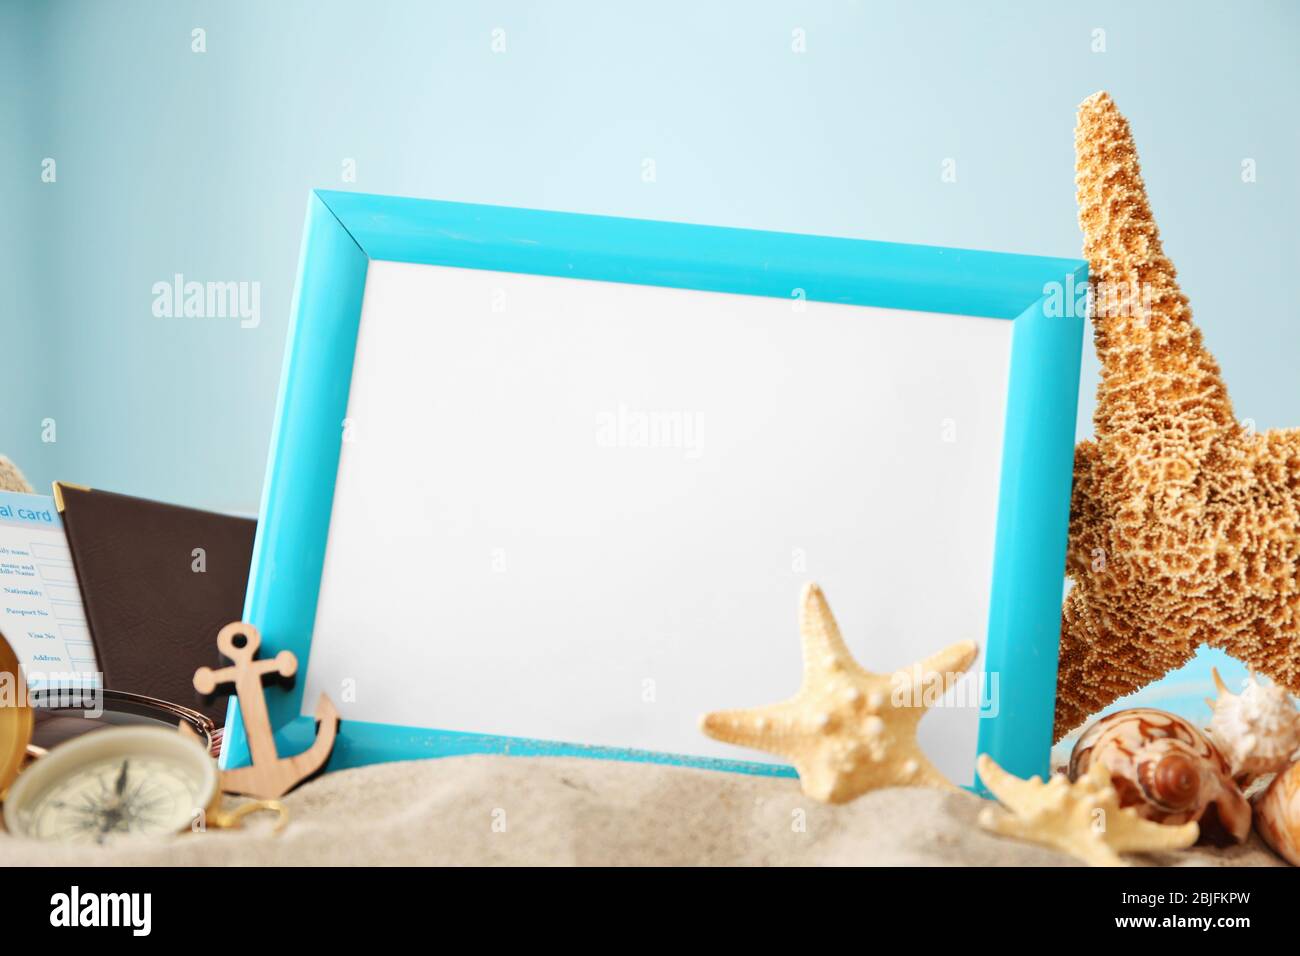 Travel concept. Composition of marine symbols and blank photo frame on sand, closeup Stock Photo